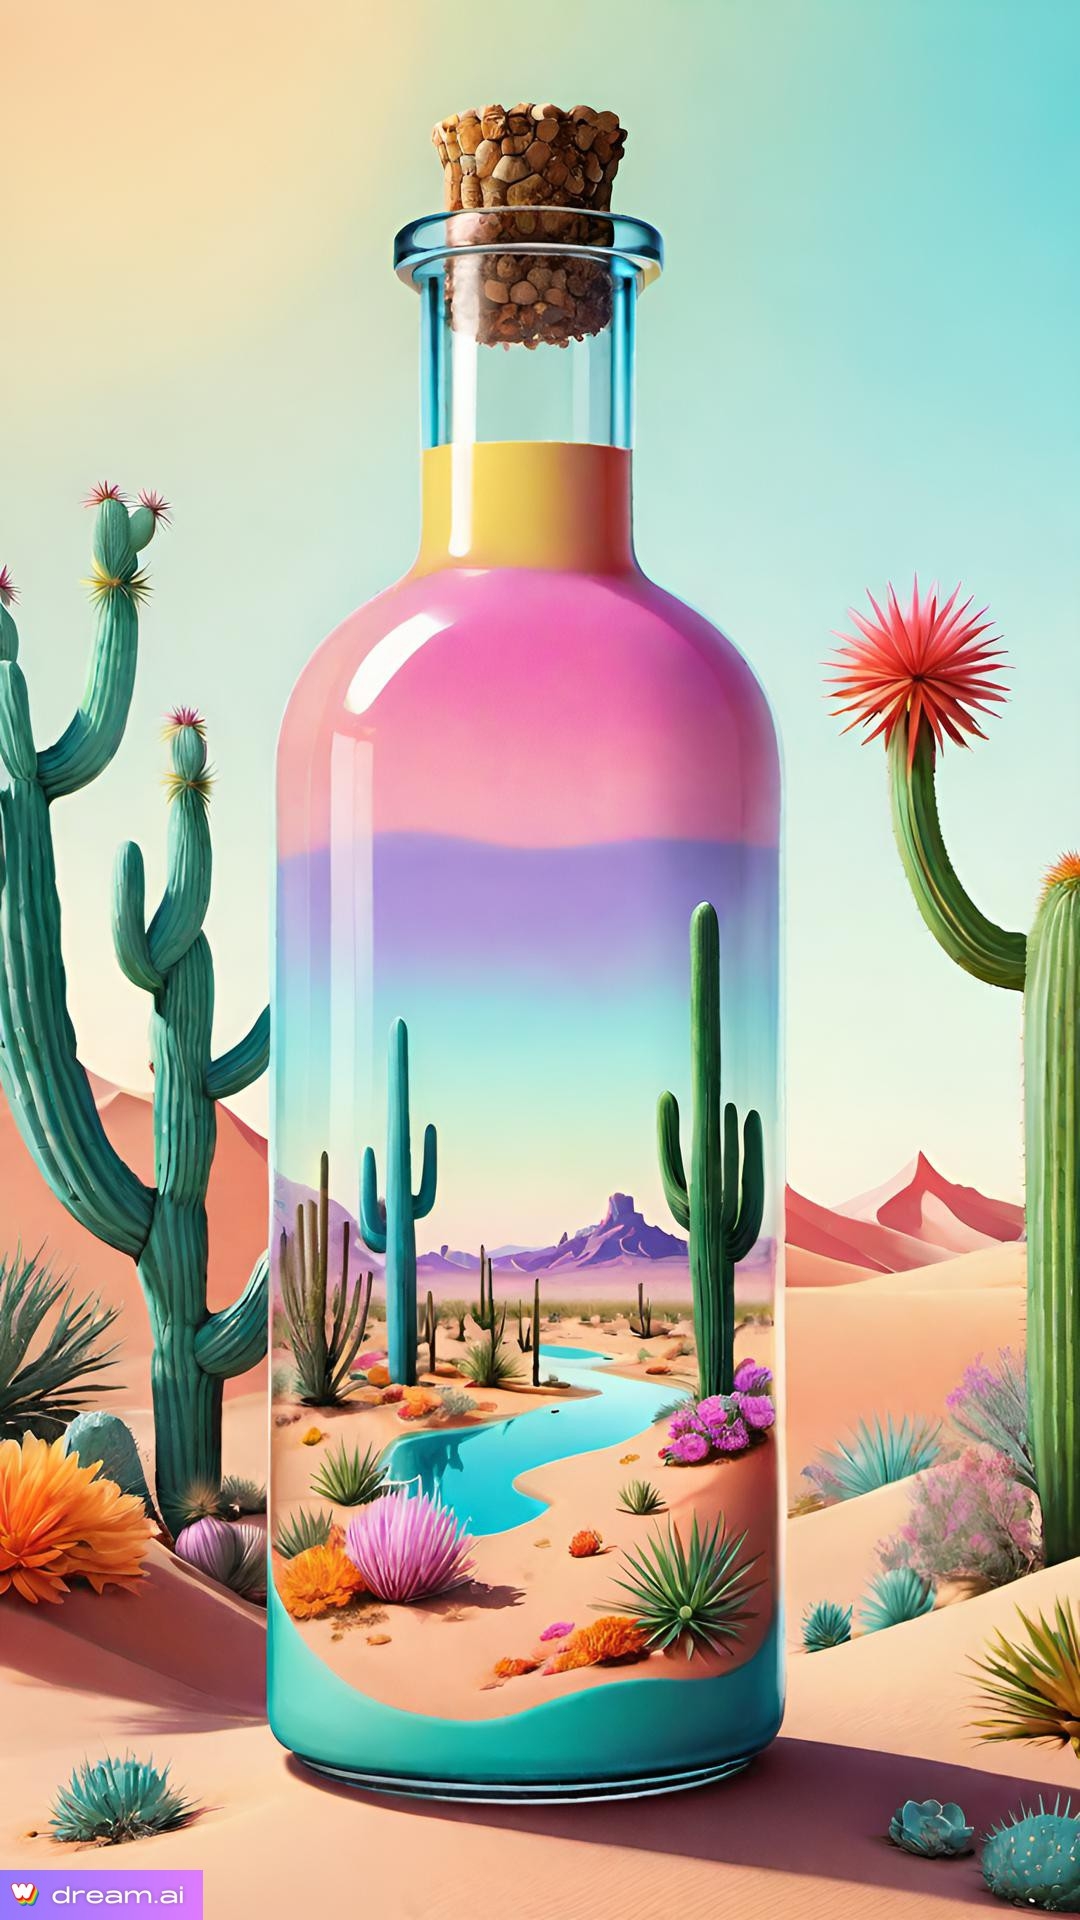 a bottle with a desert landscape and cactuses